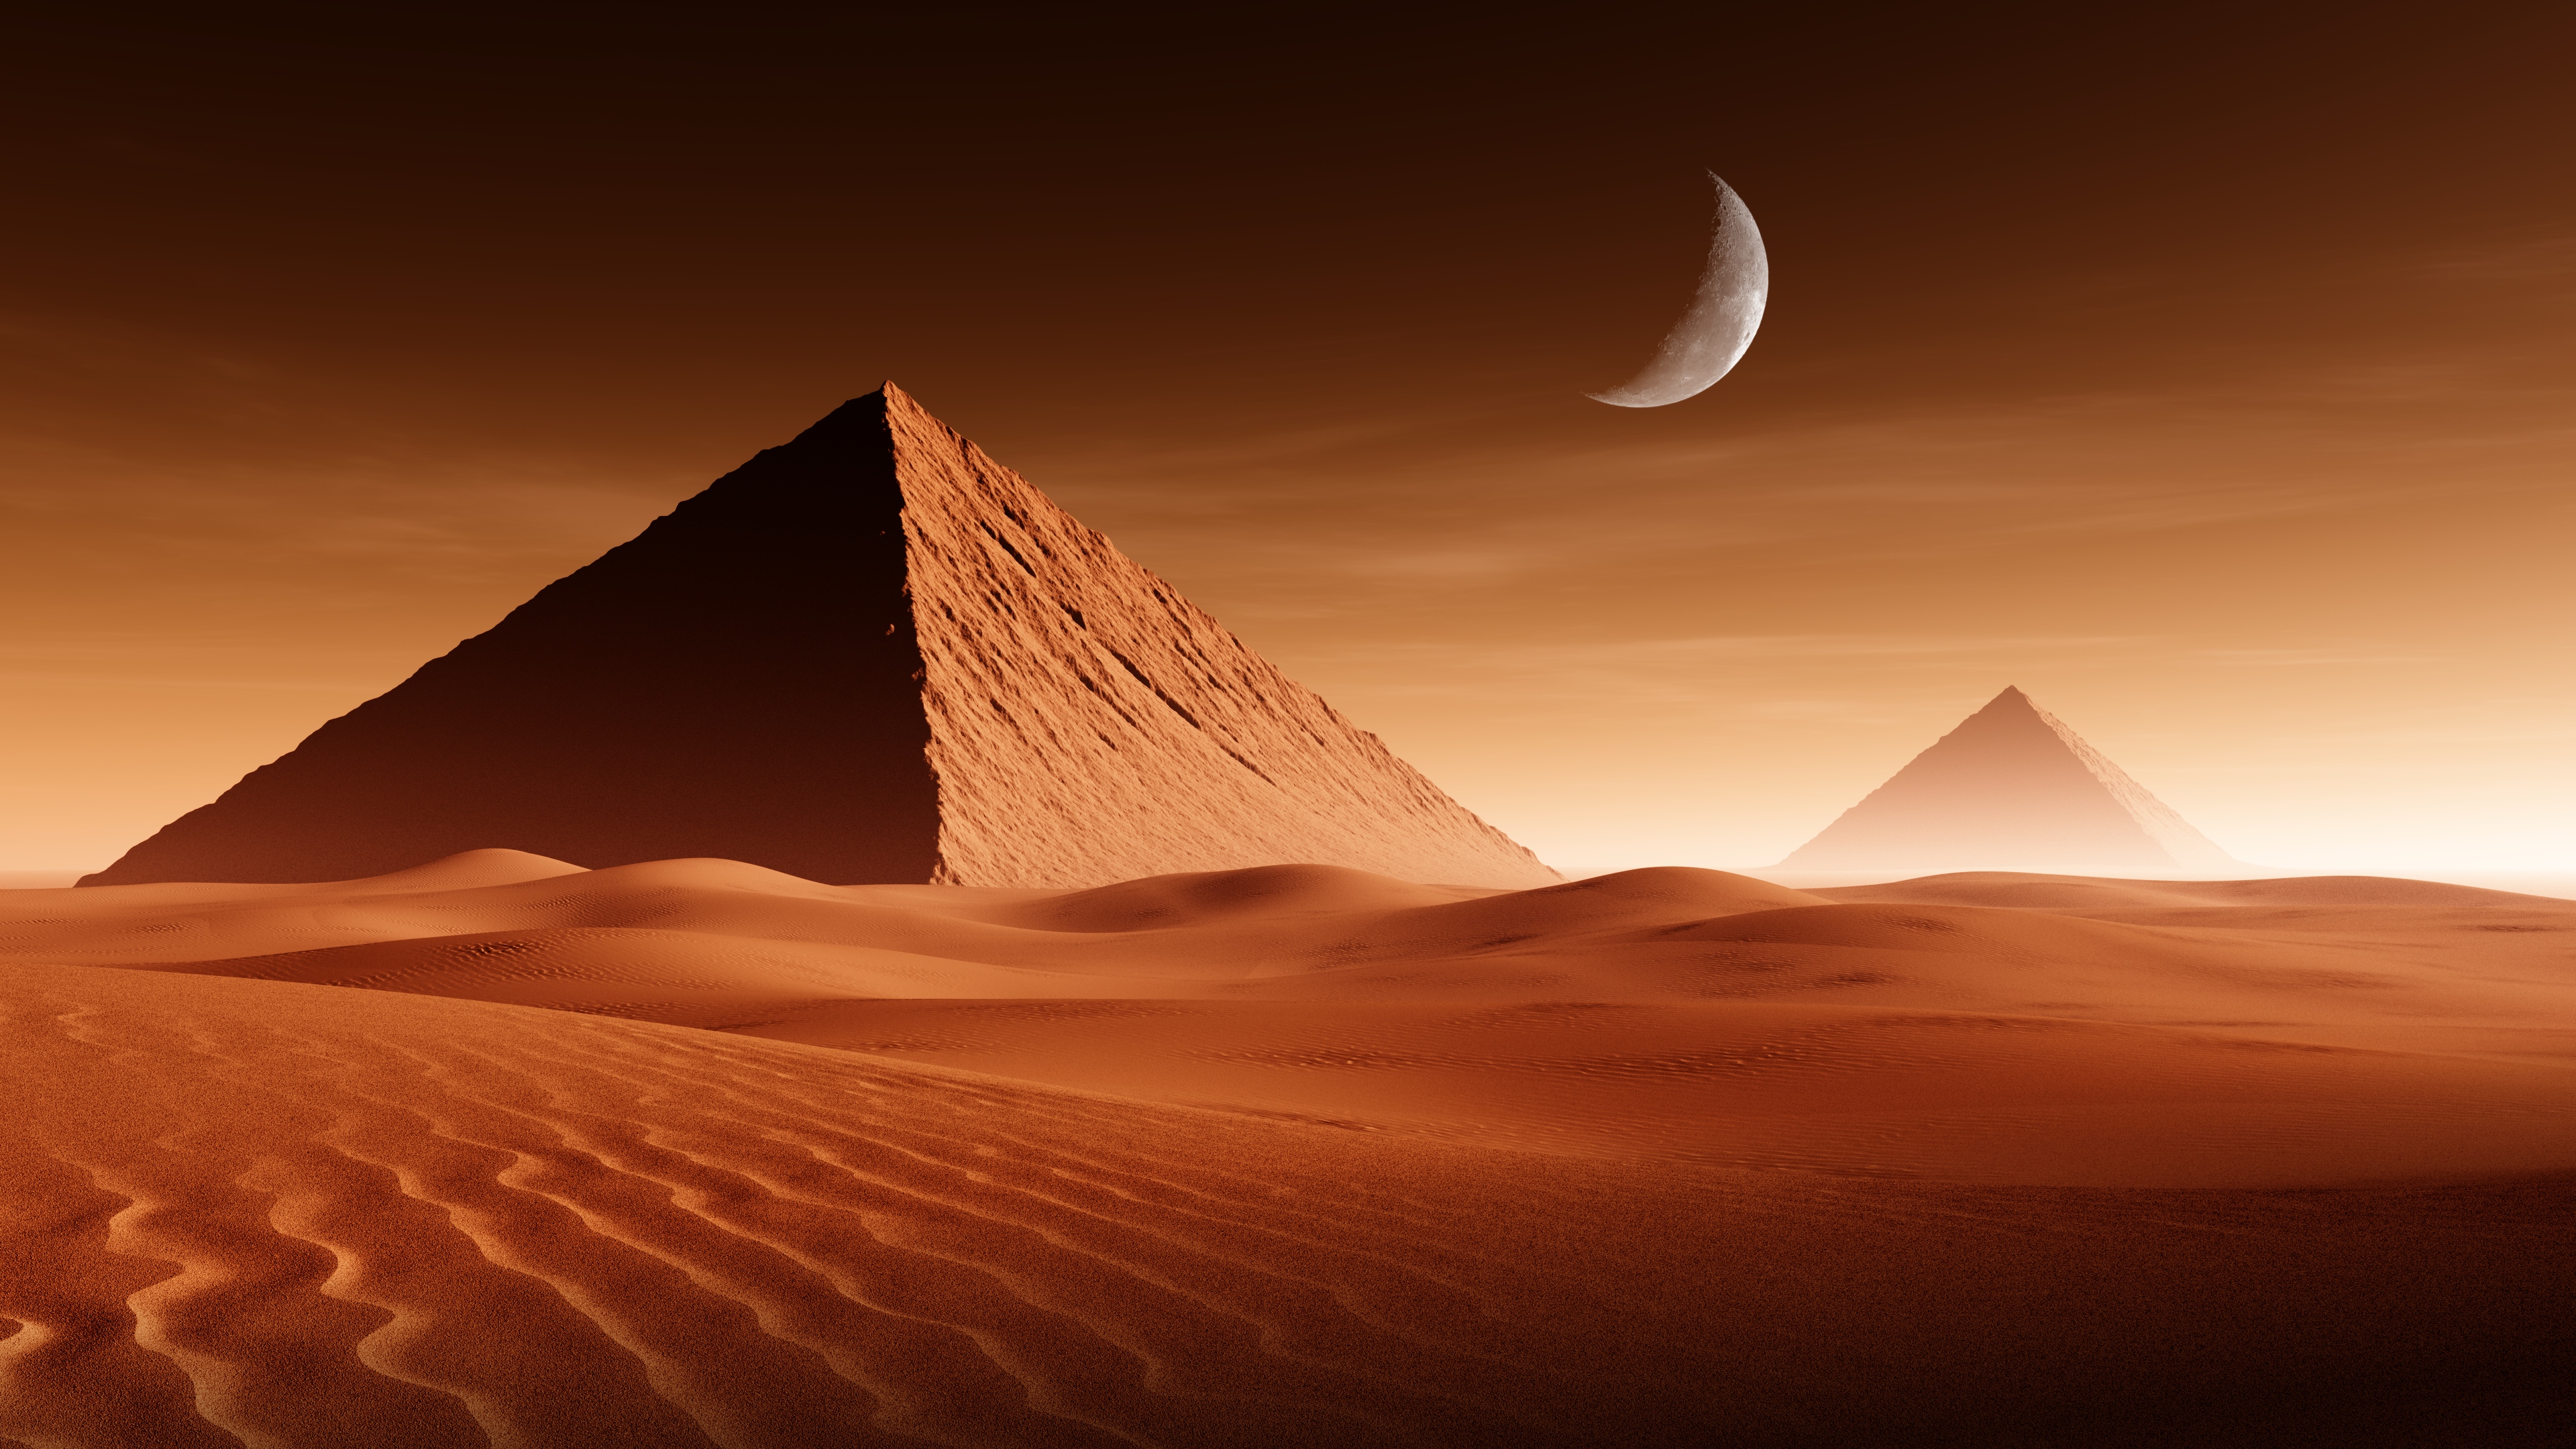 Pyramids in the desert at sunset